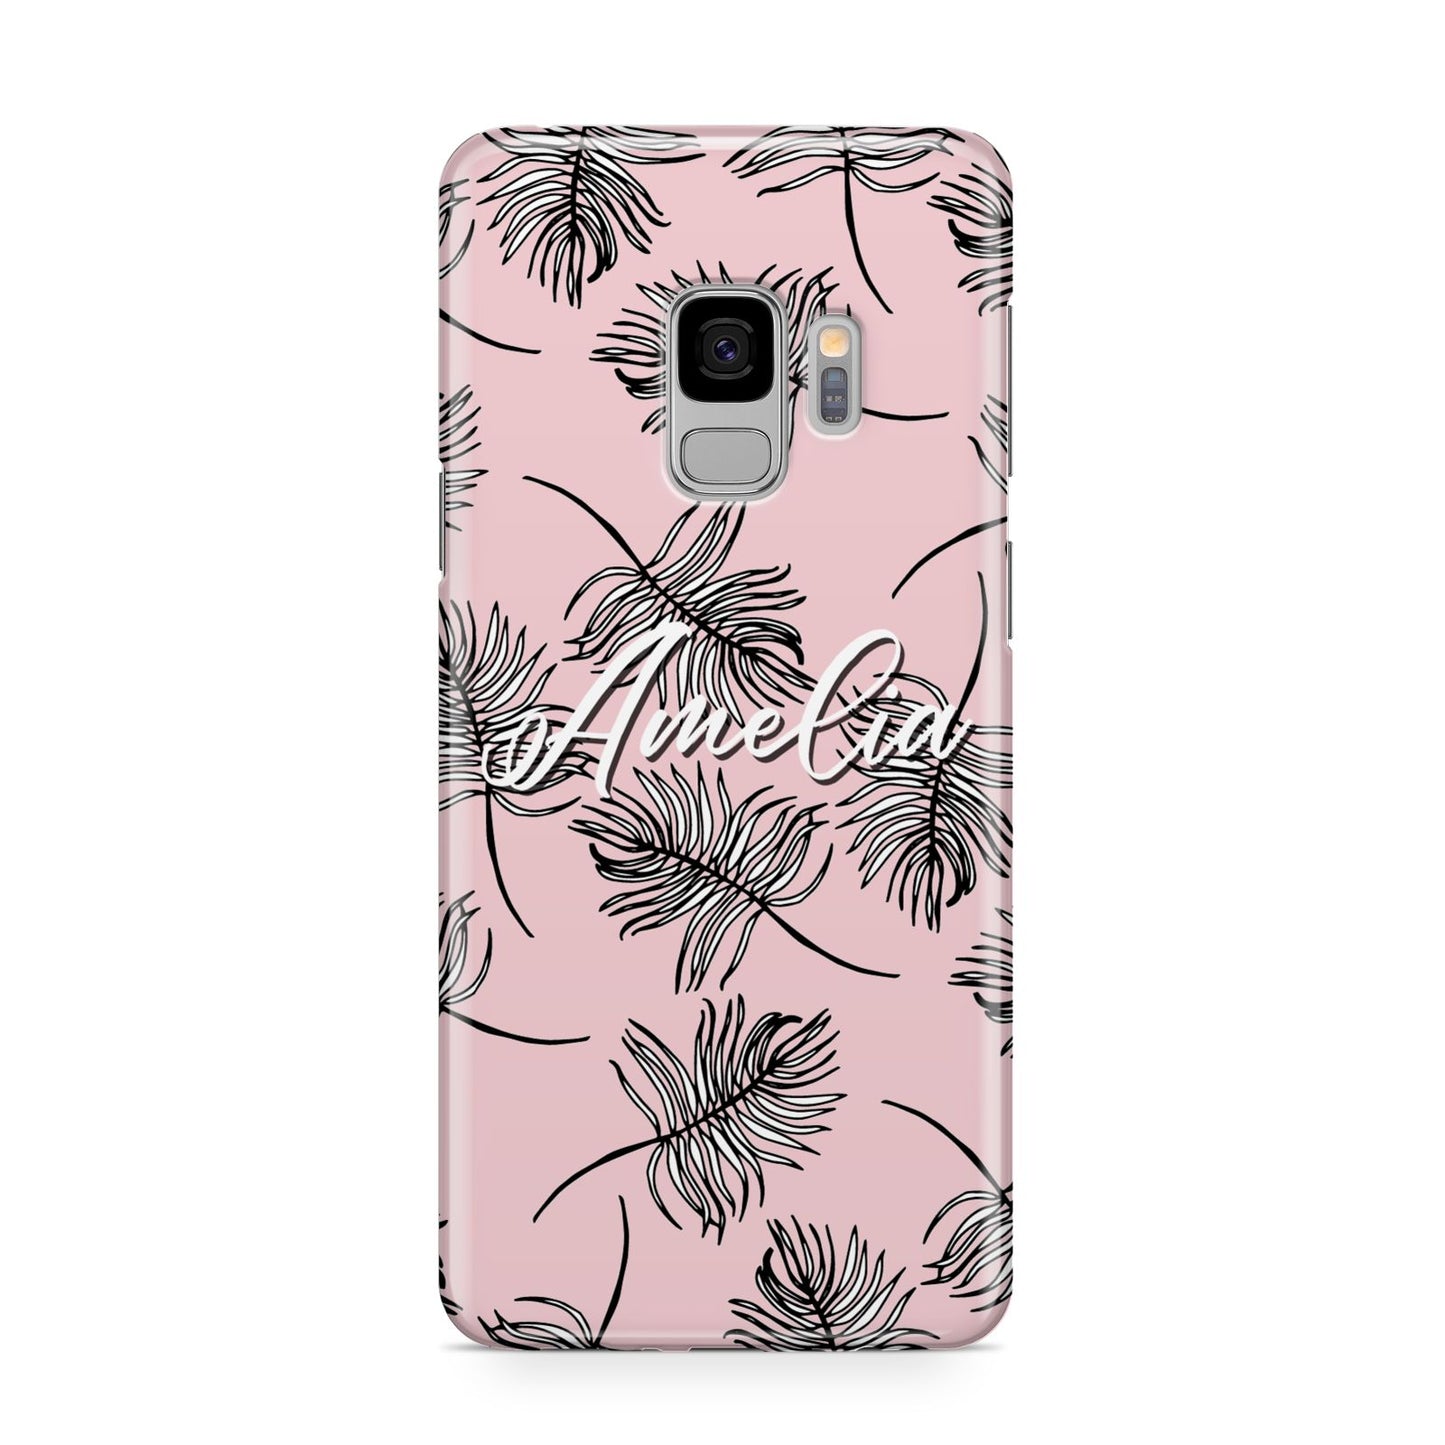 Personalised Pink Monochrome Tropical Leaf Samsung Galaxy S9 Case